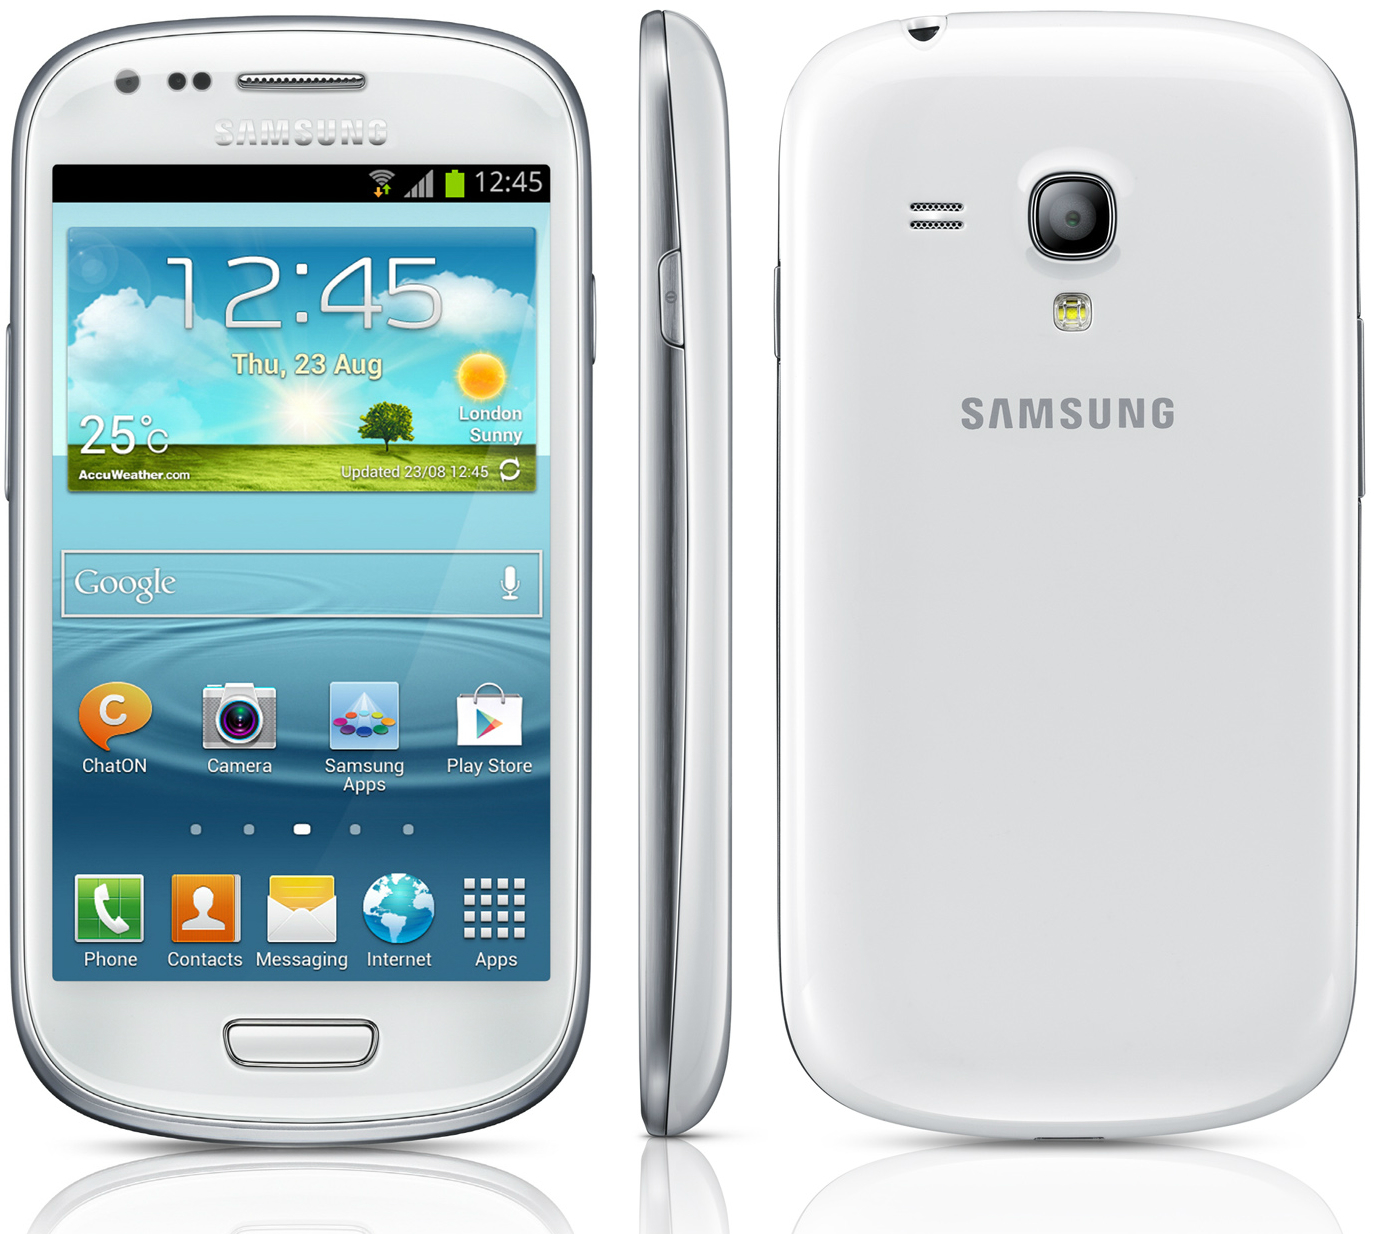 Samsung Galaxy S3 Wallpaper Pictures Image Pics Photos